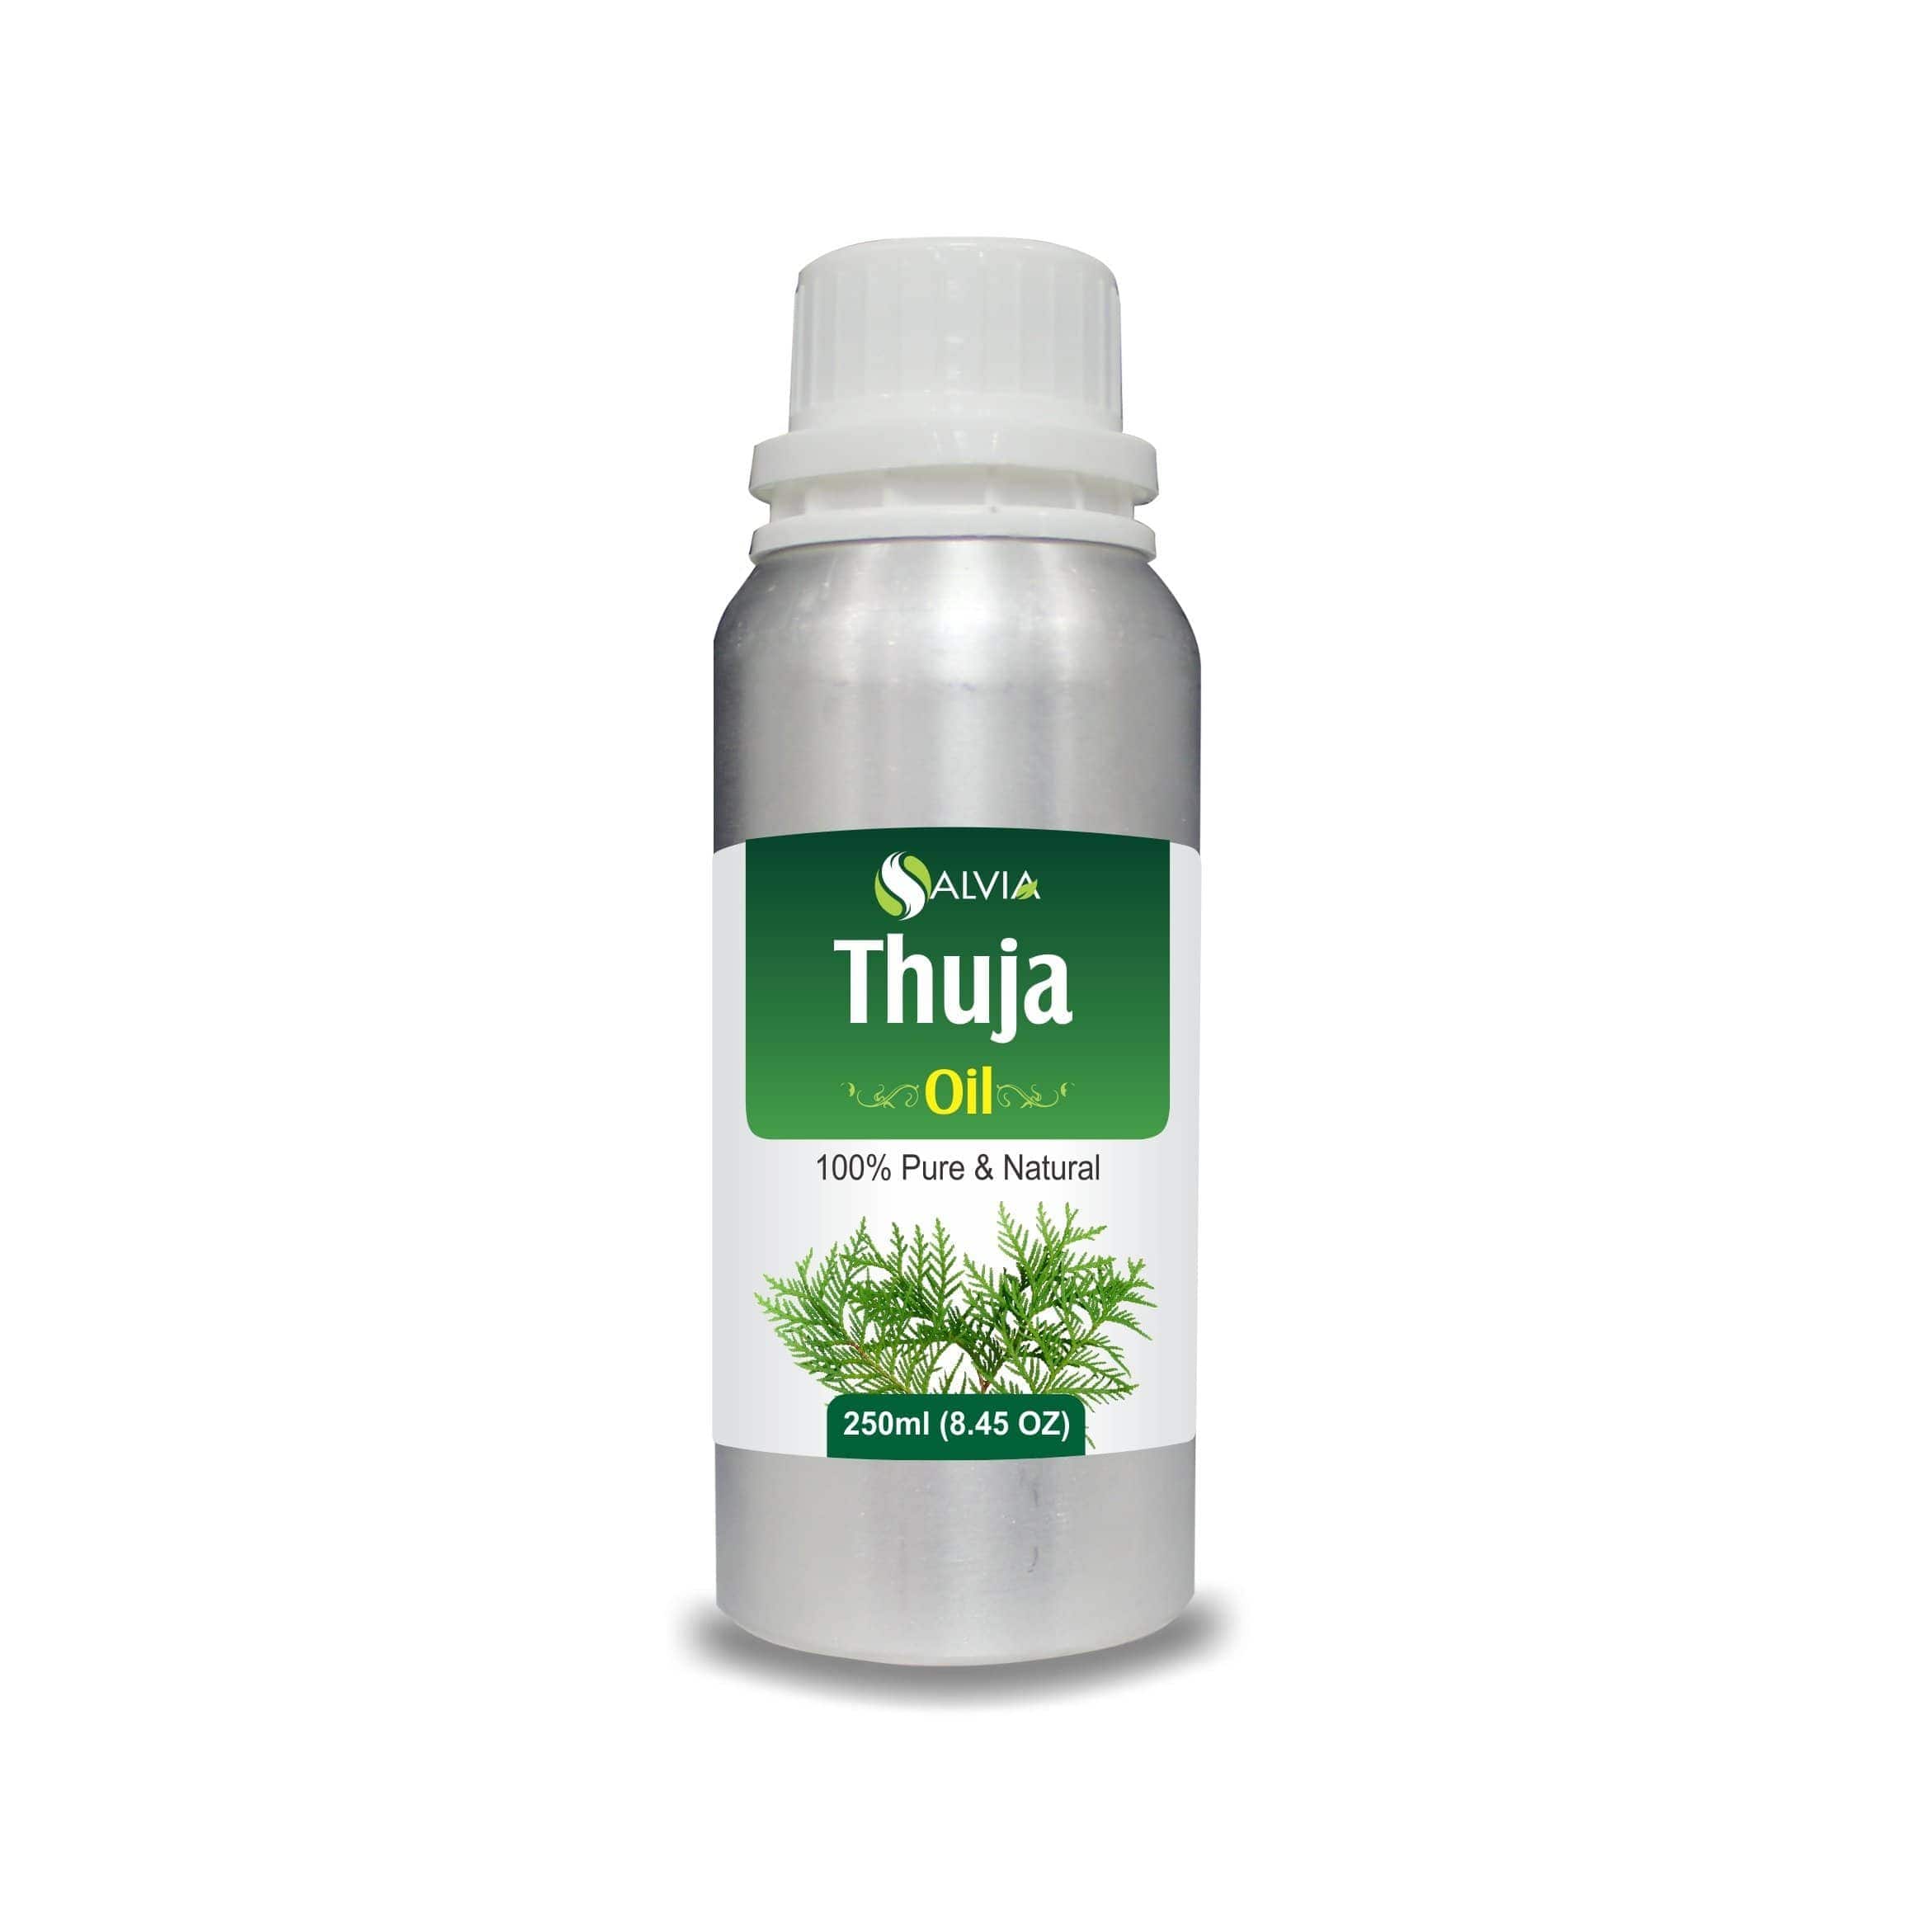 Thuja Essential Oil  Buy Thuja Oil Online at Low Price In India  Bulk  Manufacturer  VedaOils